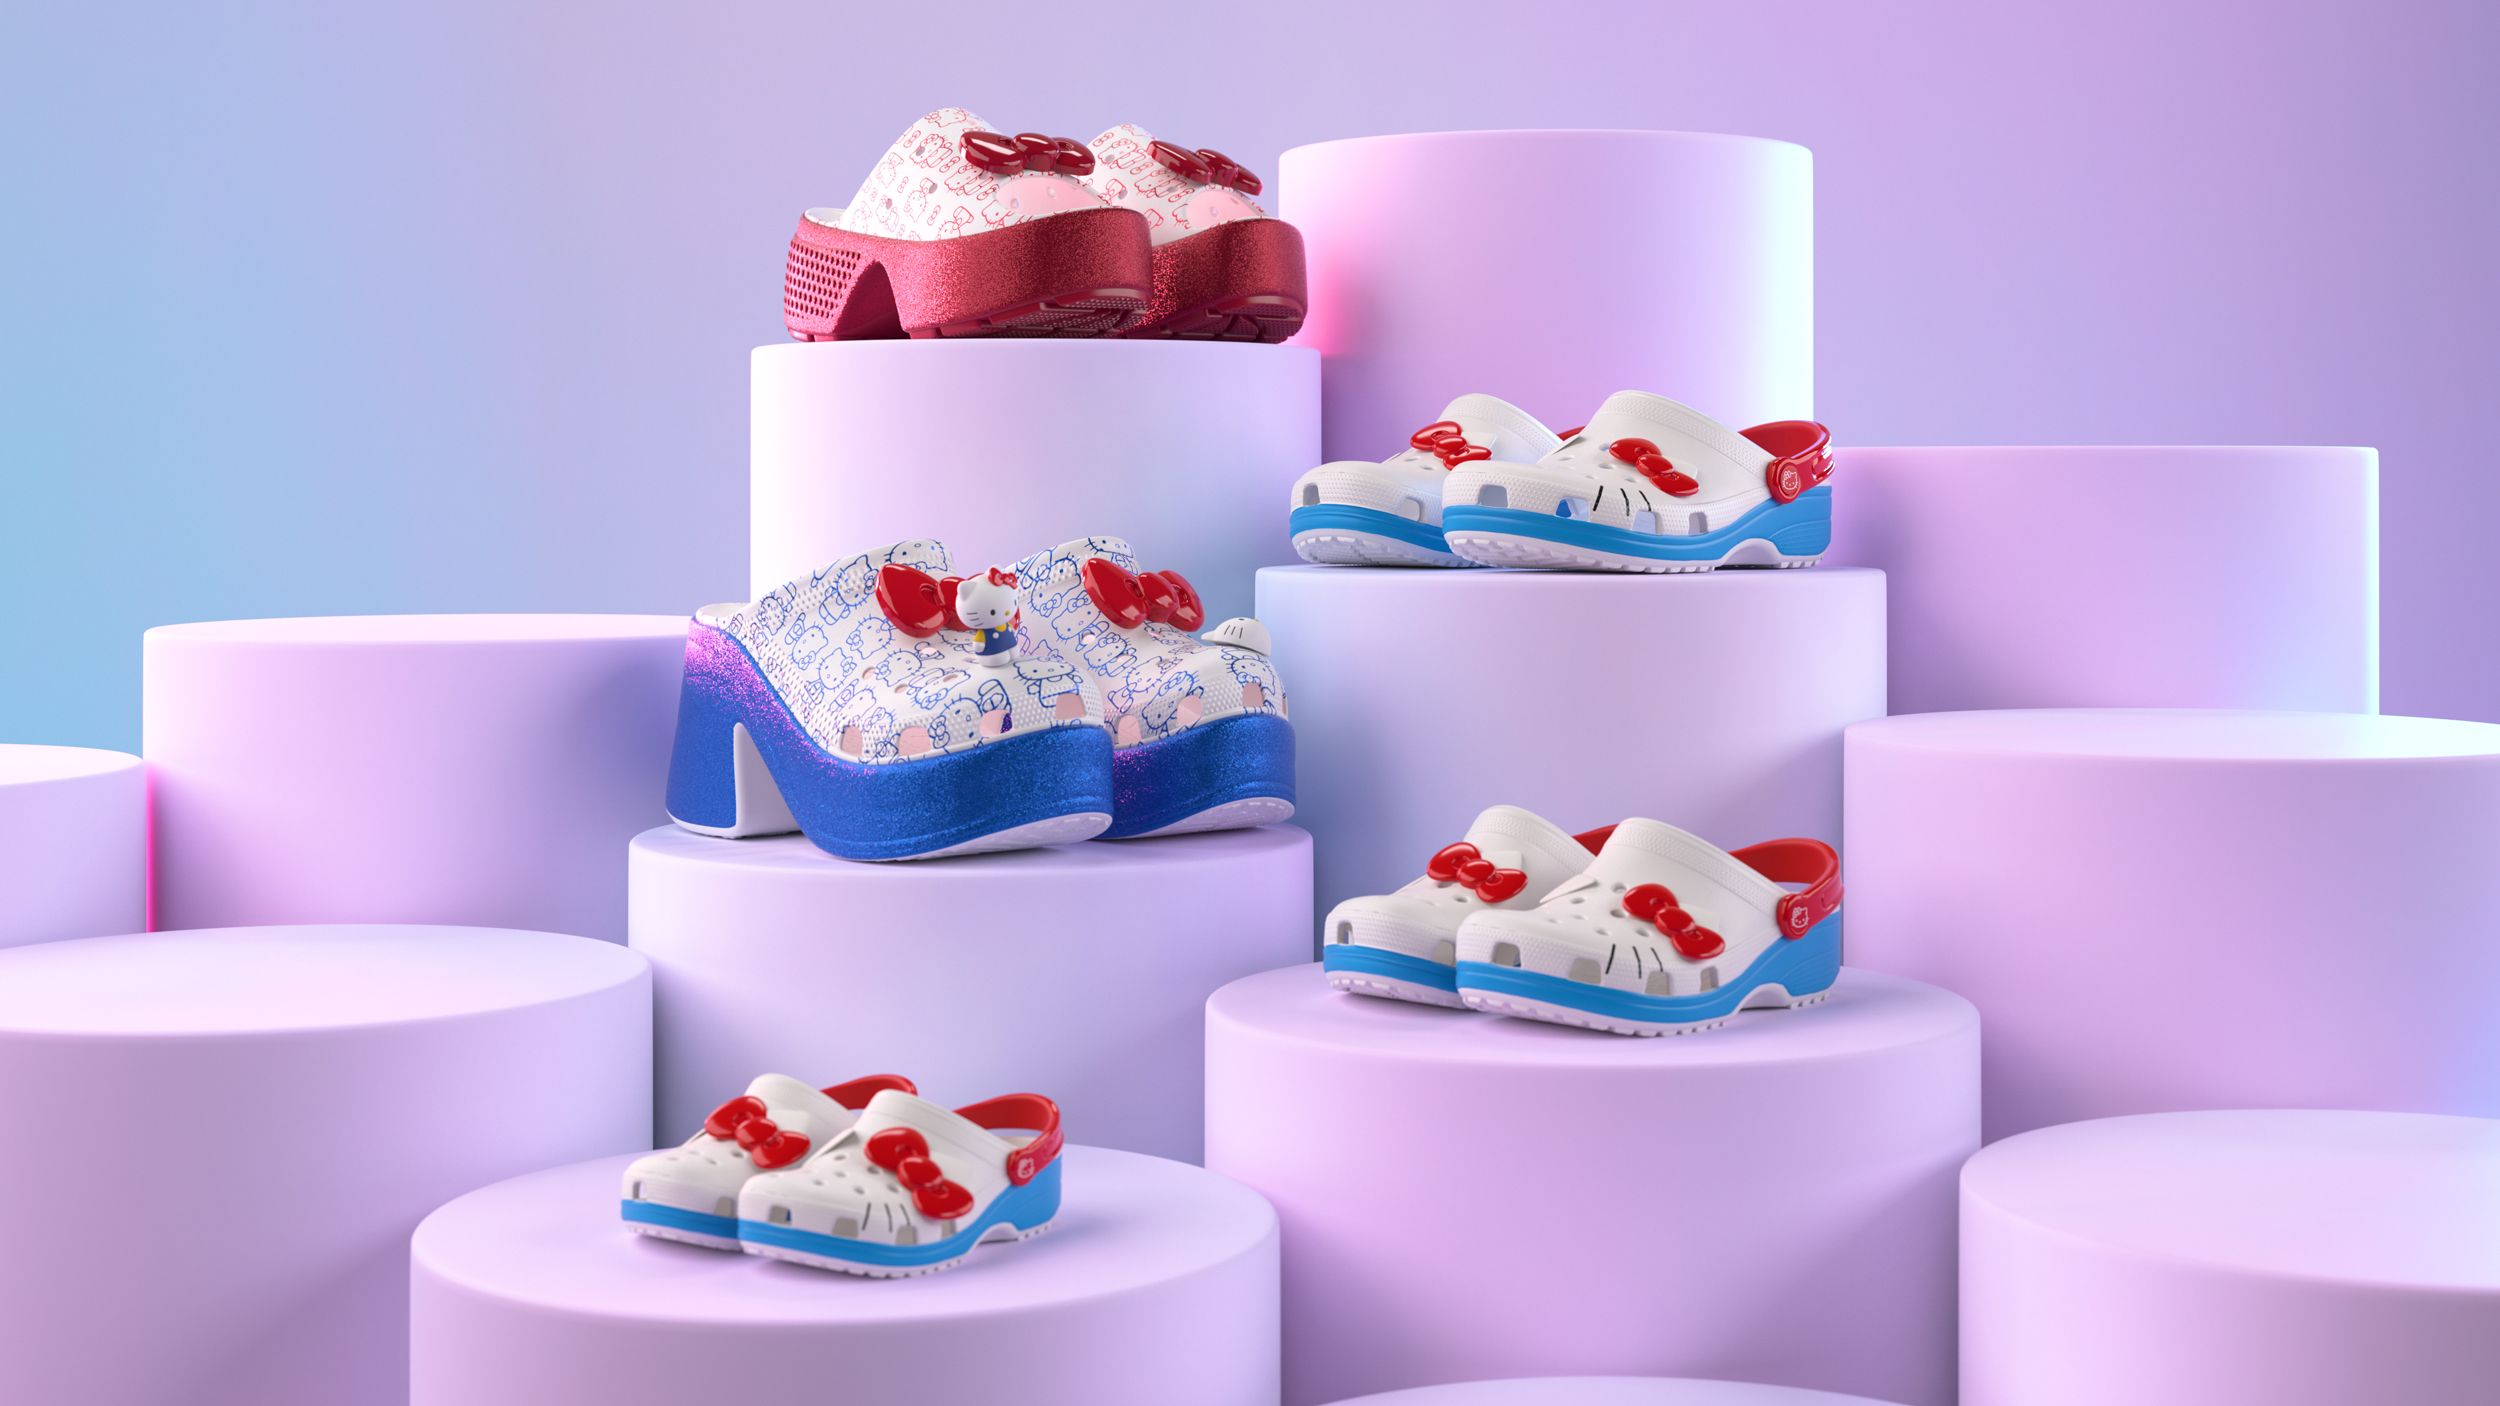 The Hello Kitty x Crocs Collab Is Here, And We're Obsessed!